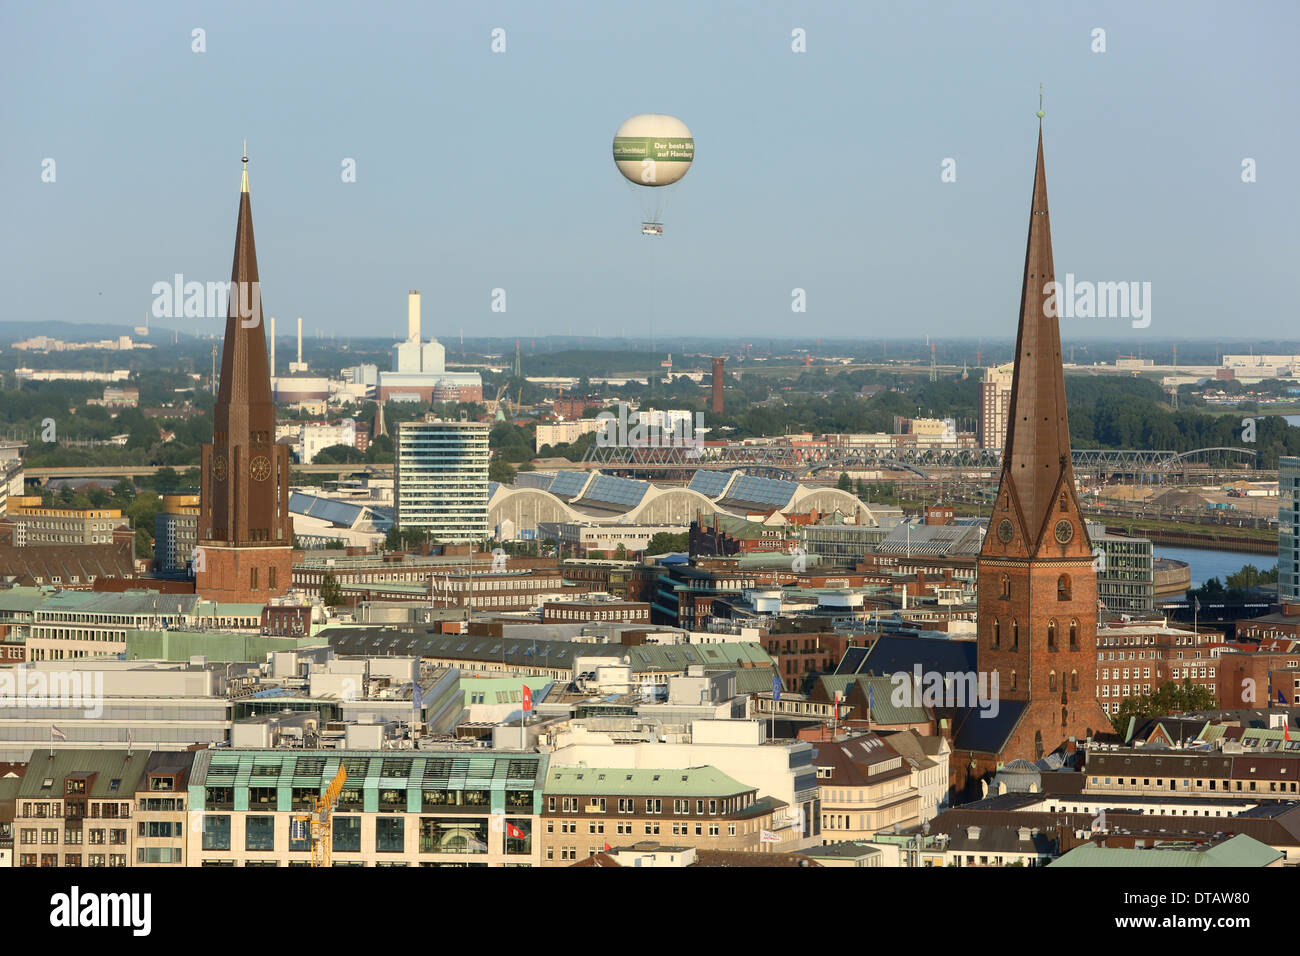 Hamburg, Germany, looking at the Jacob's Church (left) and St. Peter's Church Stock Photo